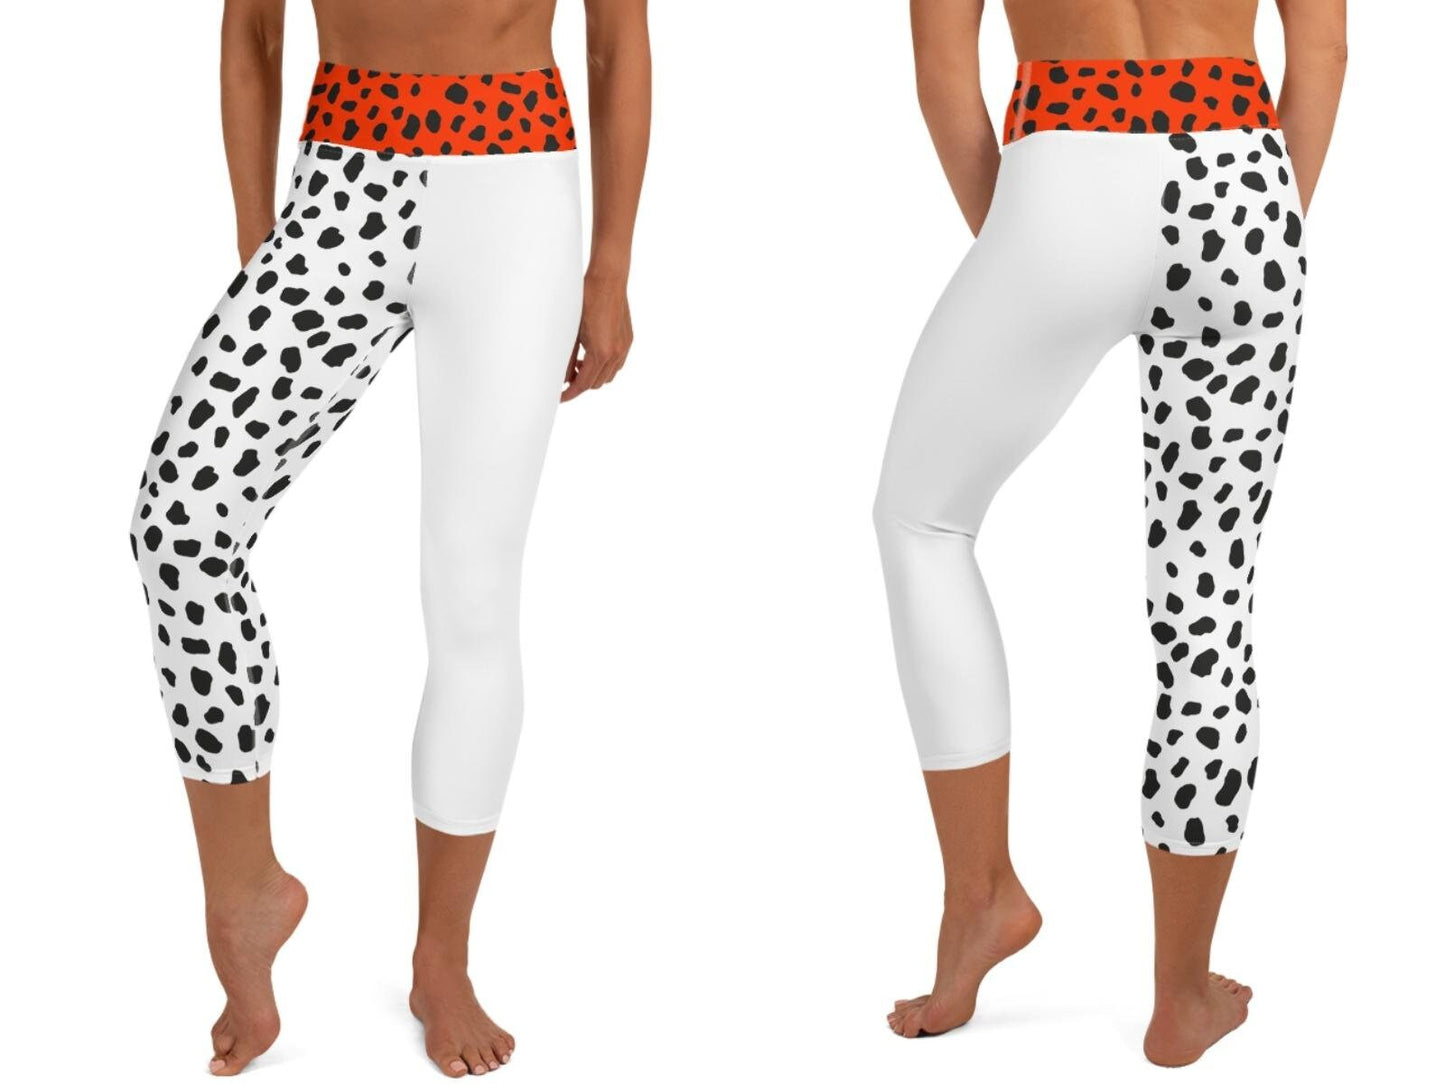 Cruel lady Inspired White and Spotted Yoga Leggings & Capris, Plus Size Yoga Leggings, Cosplay, Adult Halloween Costume, Gift for Her